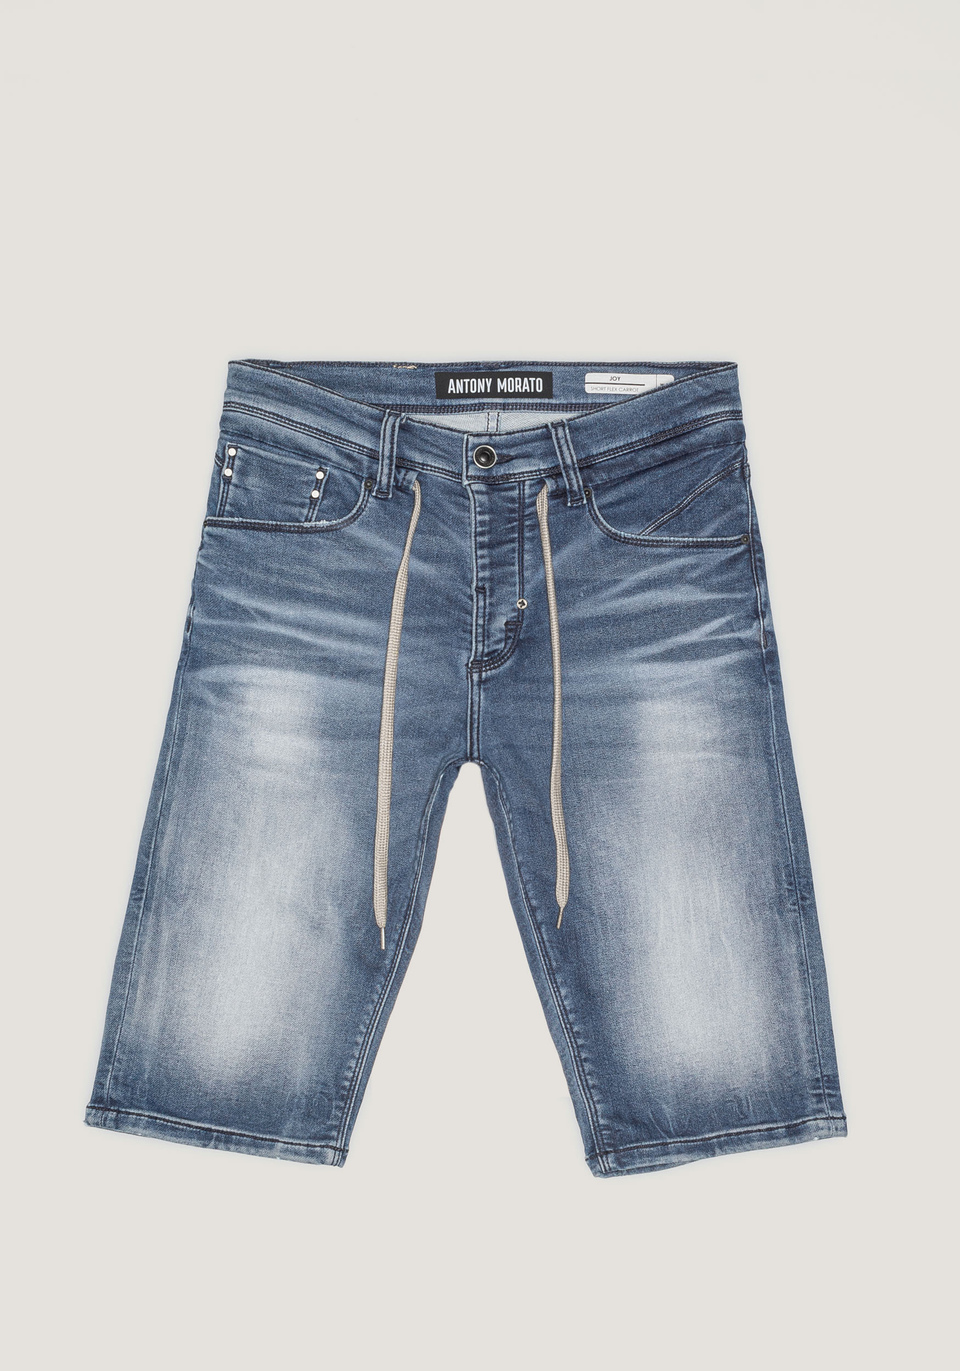 CARROT-FLEX-FIT “JOY” USED-EFFECT SHORTS WITH A DARK WASH - Antony Morato Online Shop